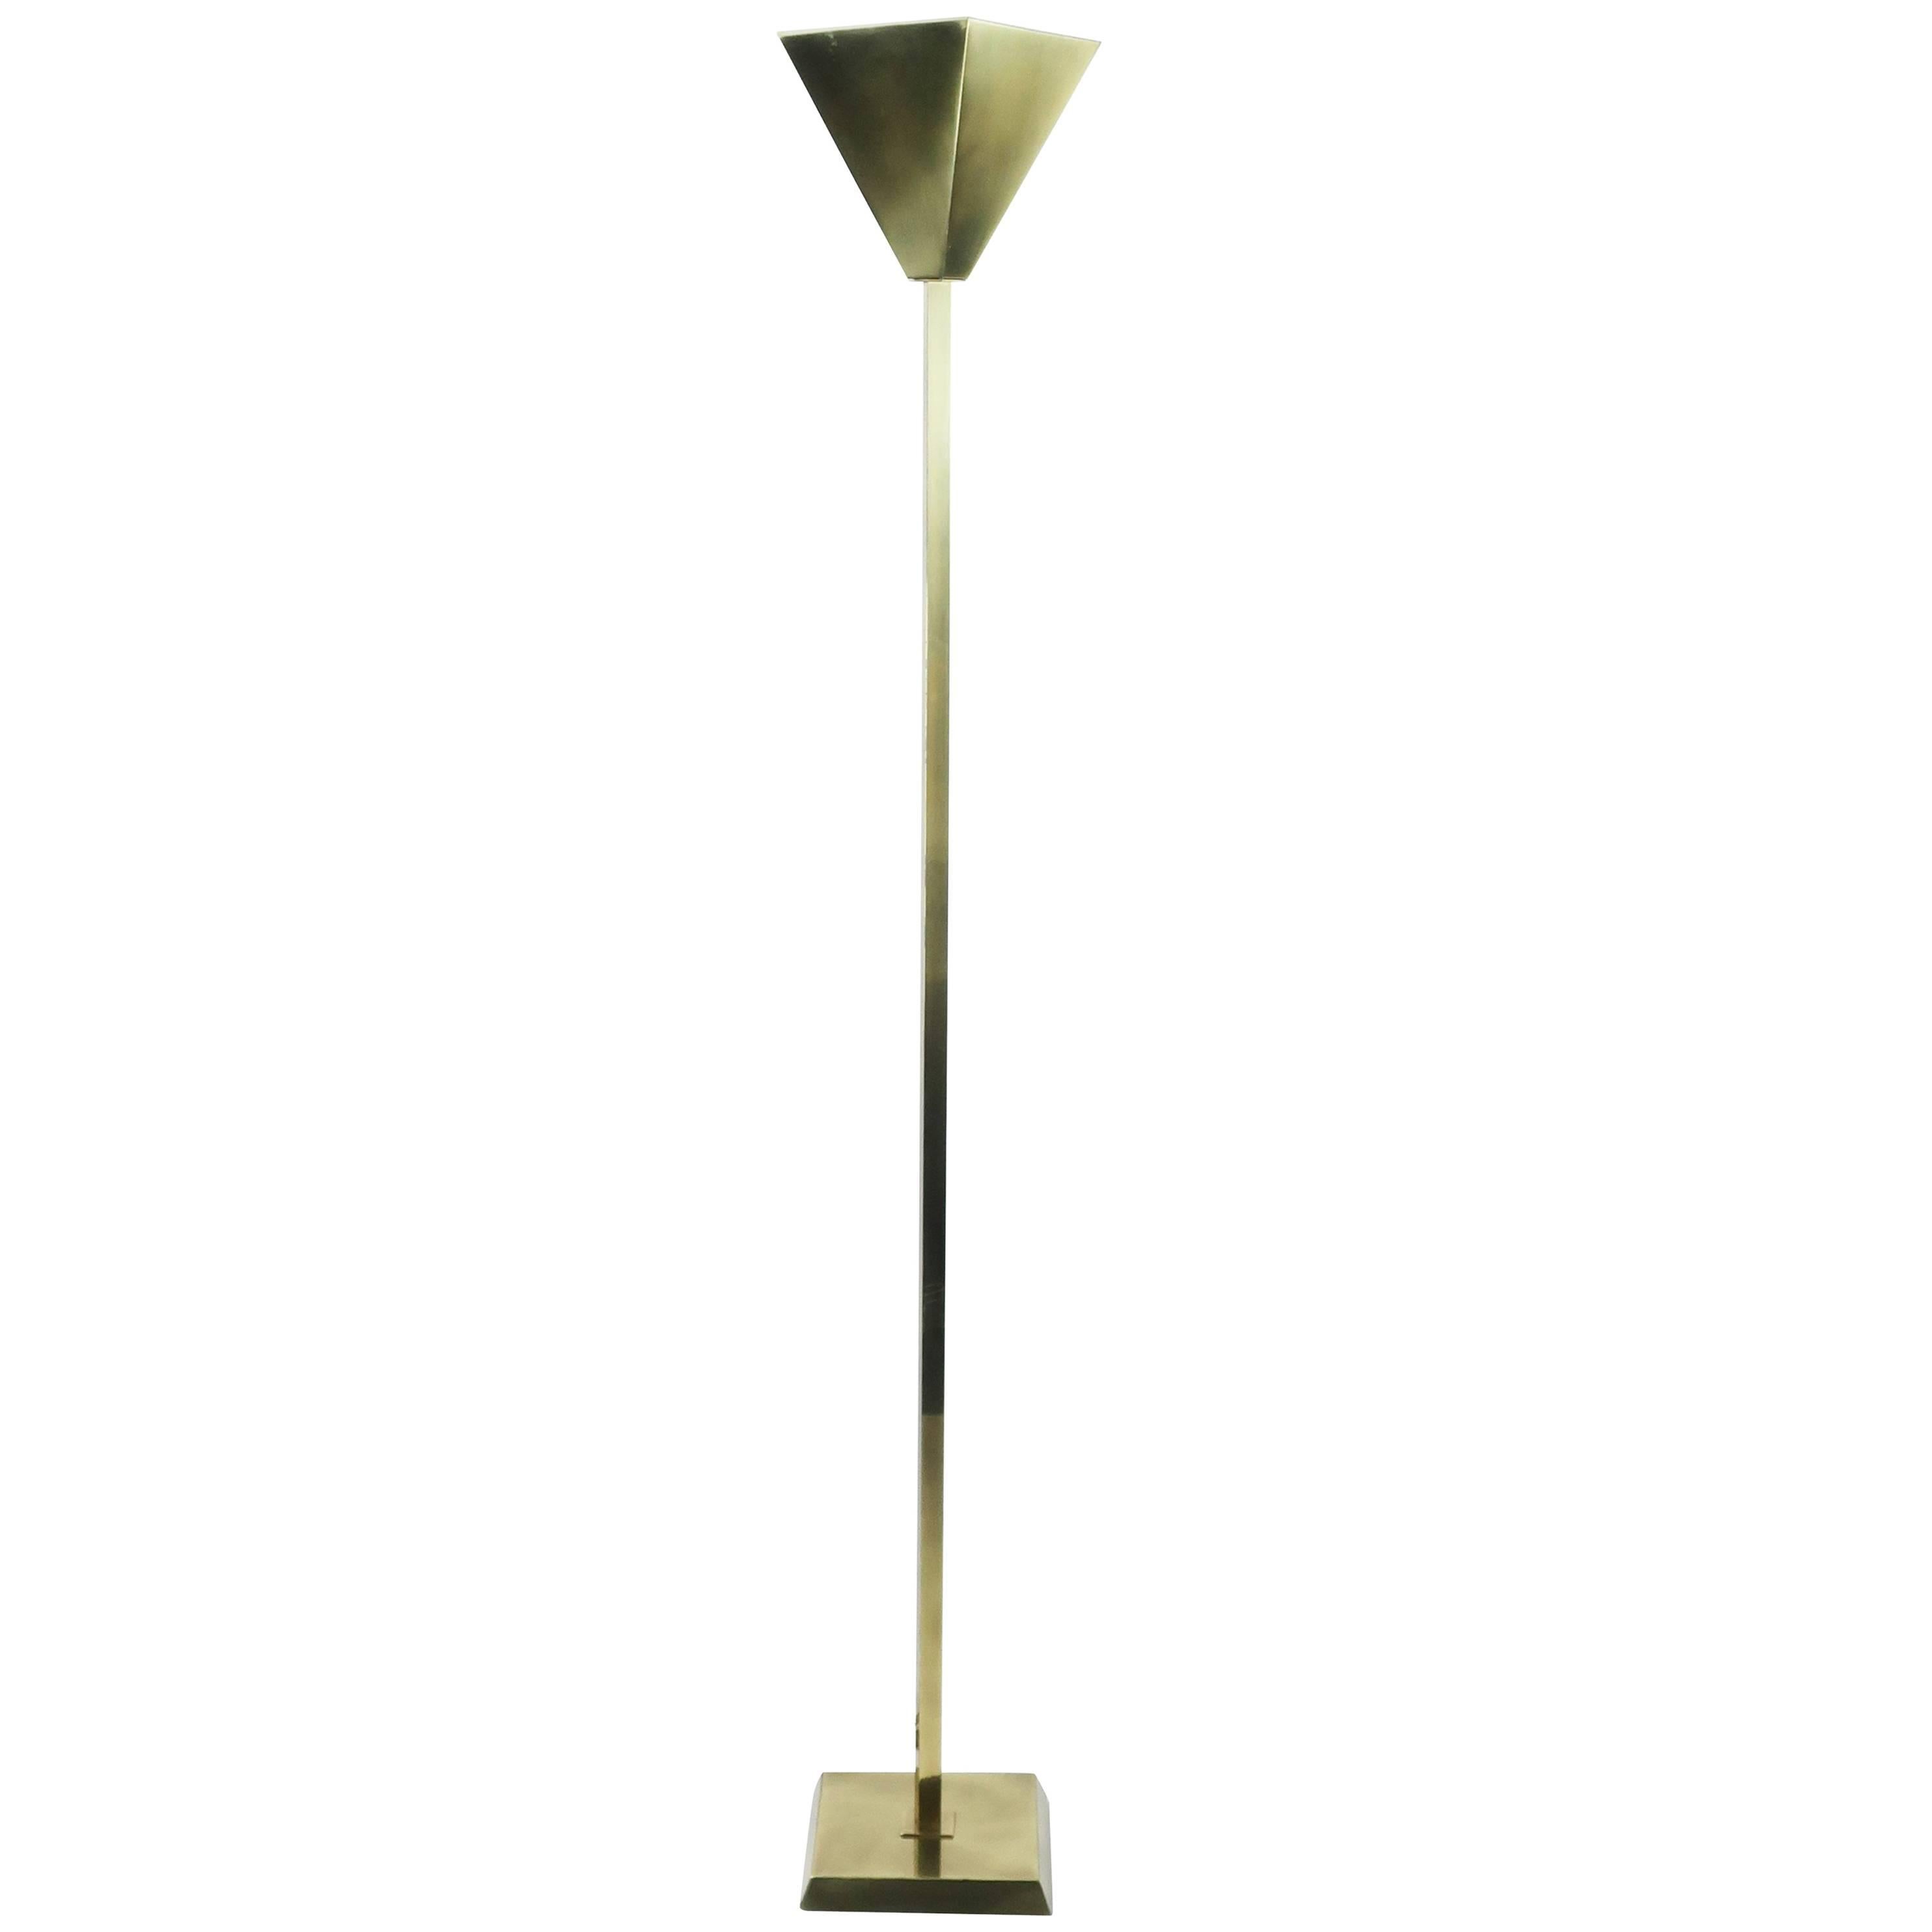 Relco Milano 1980s Brass Torchiere